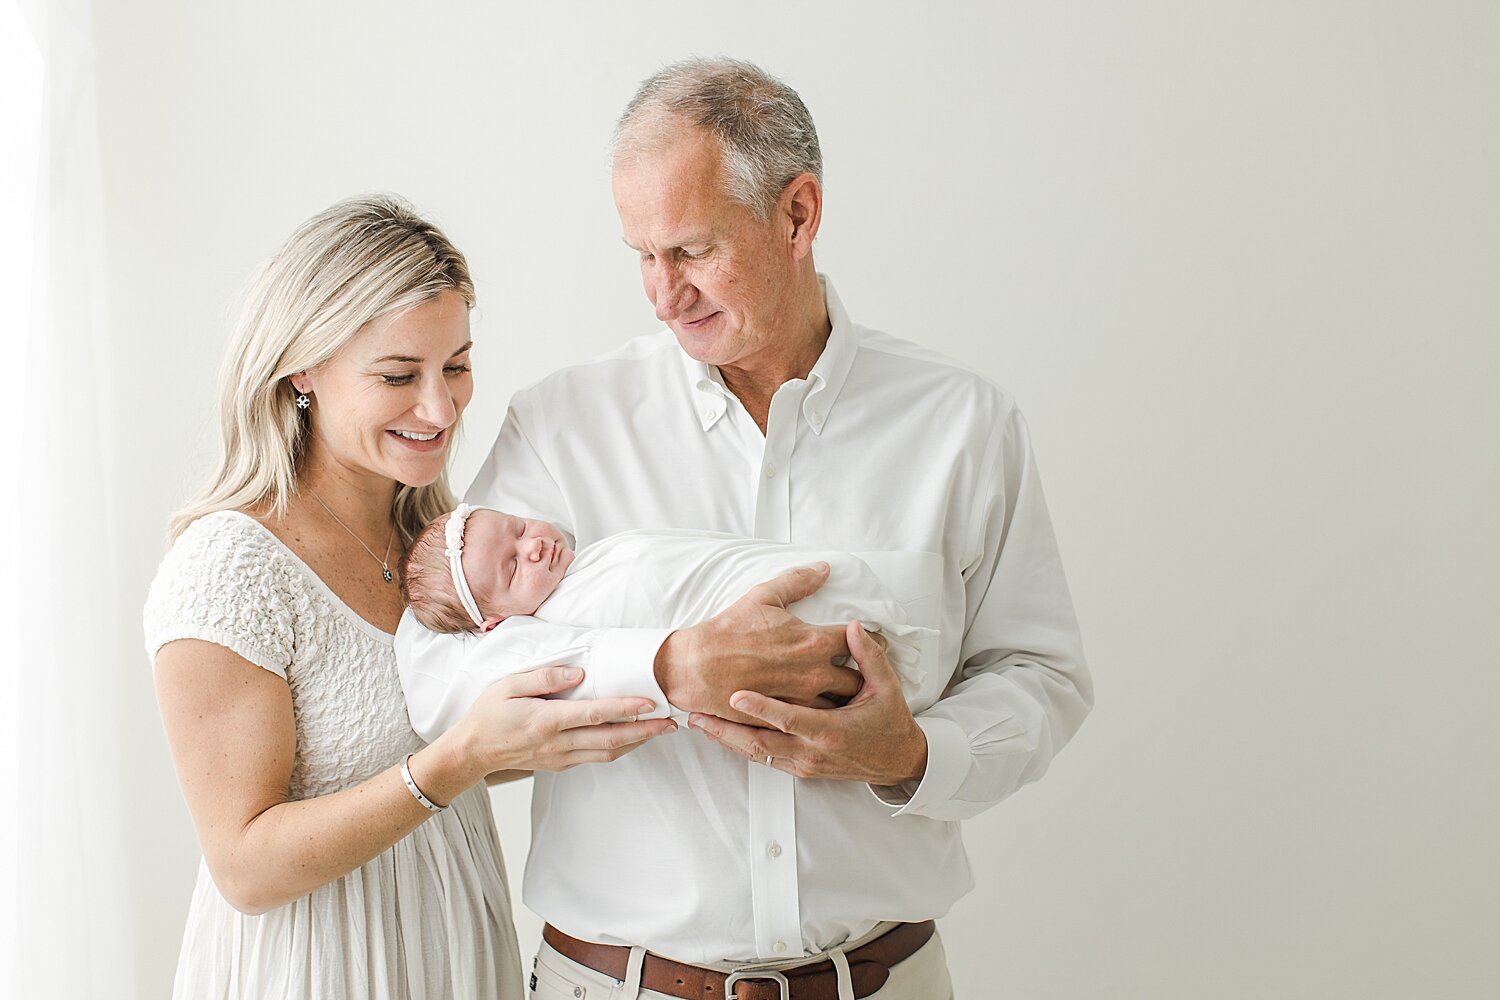 Mom and dad adoring their baby girl during newborn photoshoot in a newborn studio in Darien, CT. Photos by Kristin Wood Photography. 